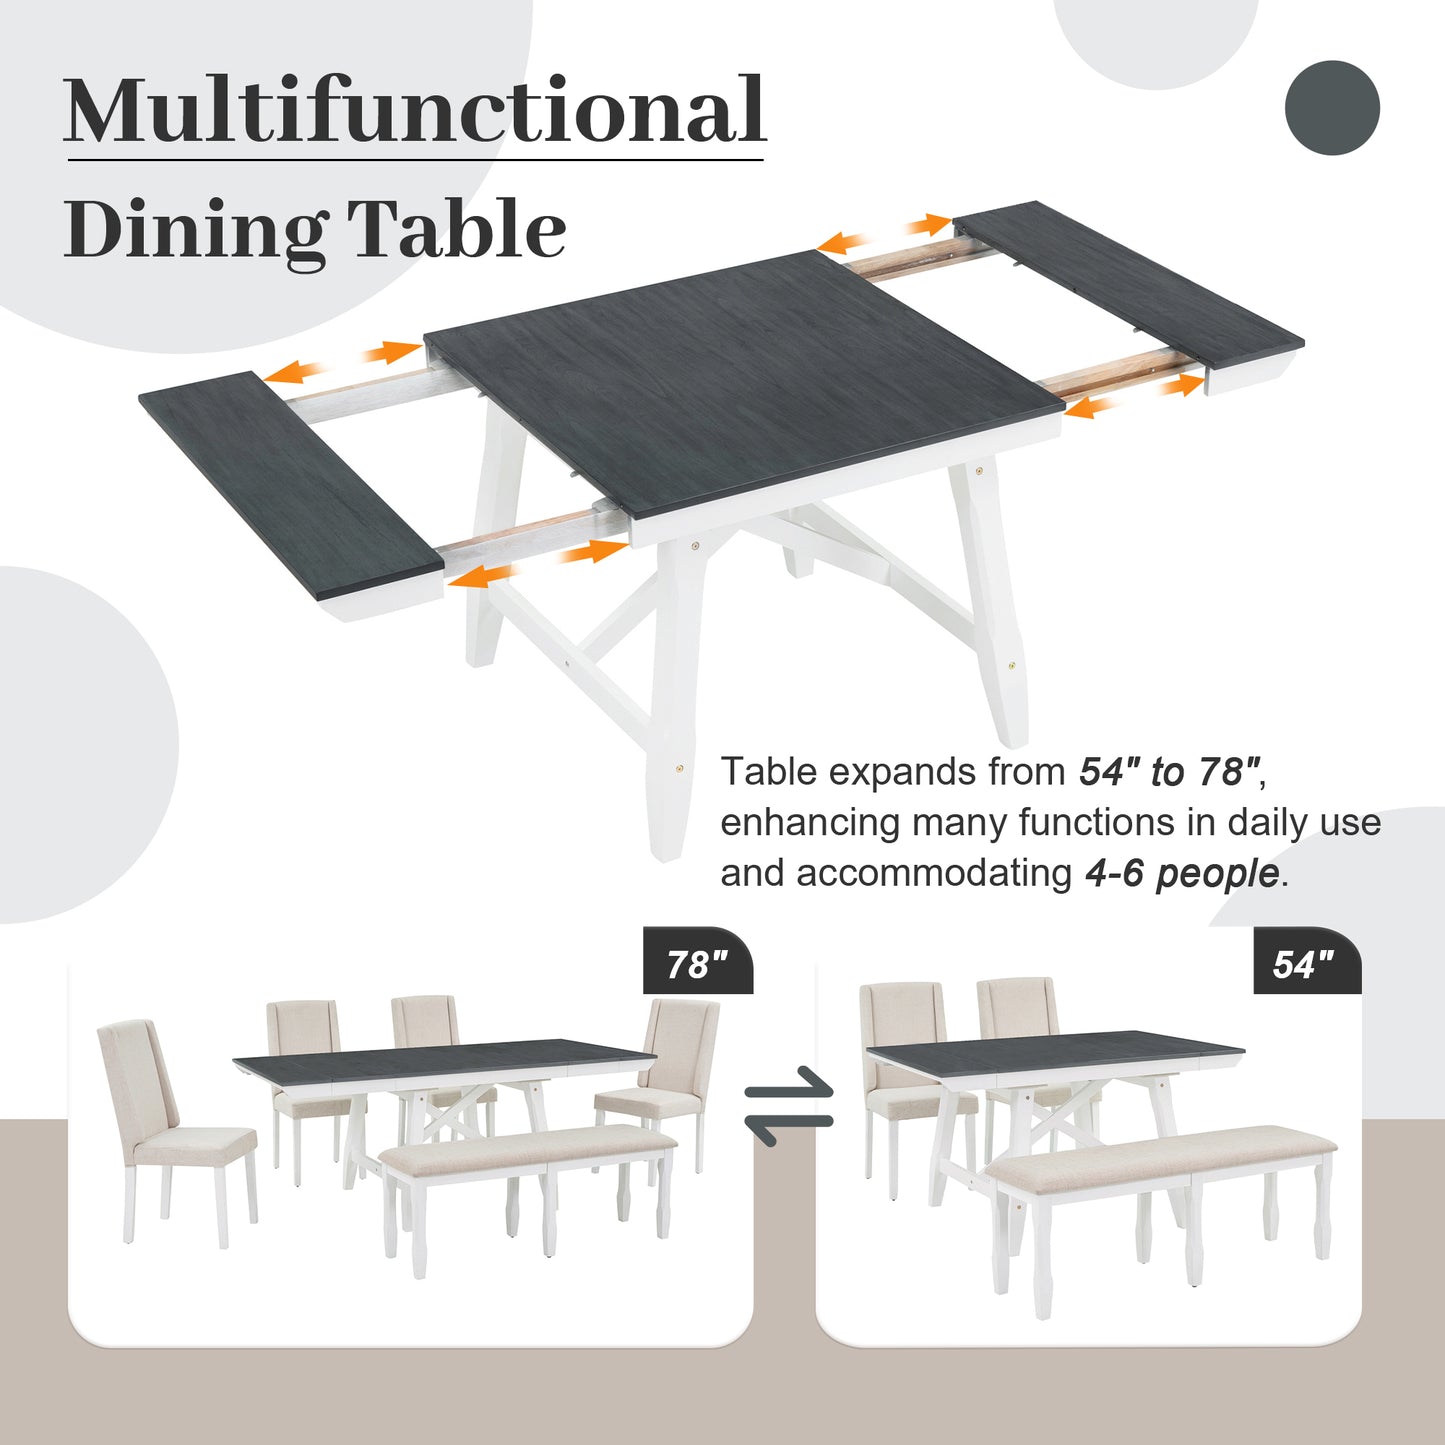 TREXM 6-Piece Classic Dining Table Set, Rectangular Extendable Dining Table with two 12"W Removable Leaves and 4 Upholstered Chairs & 1 Bench for Dining Room (Gray+White)